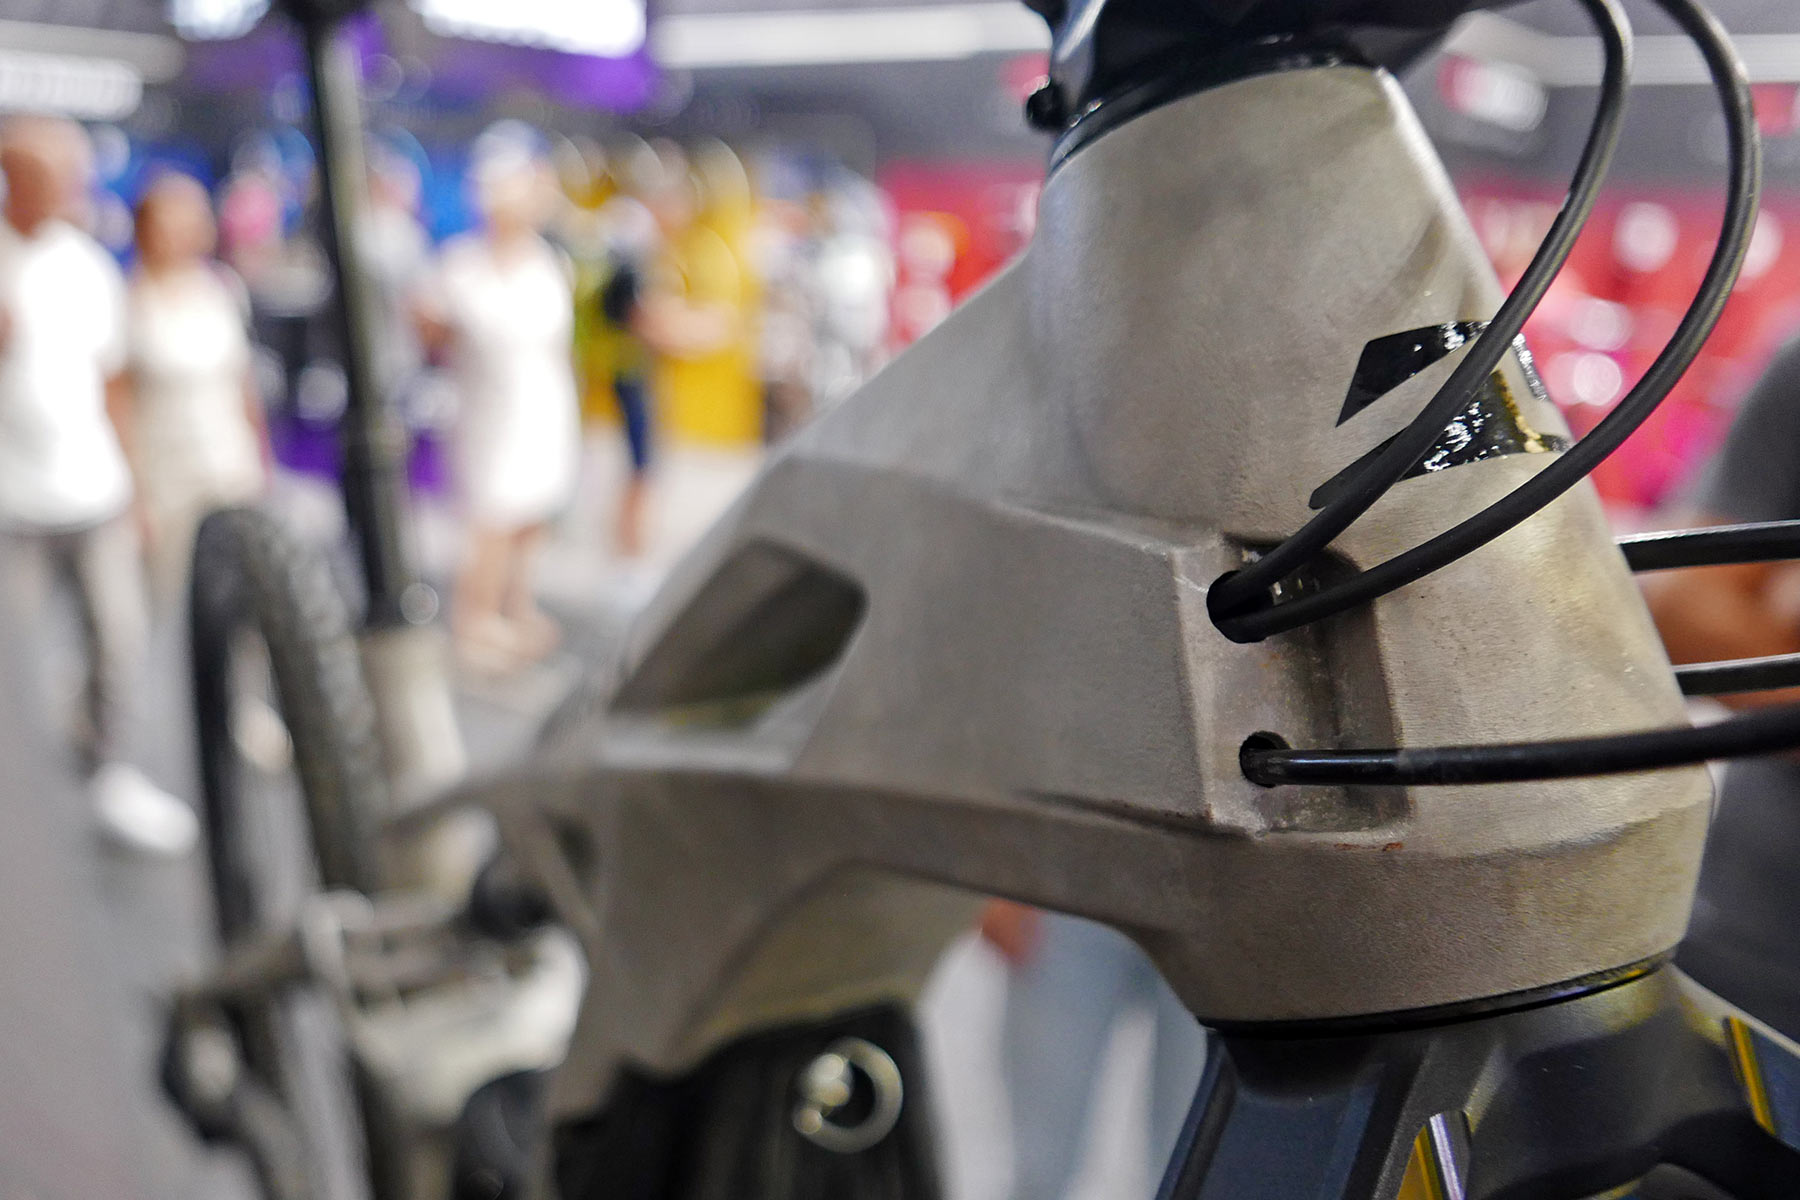 Thok Project 4 eMTB prototype, lightweight 3D-printed alloy all-mountain ebike, headtube